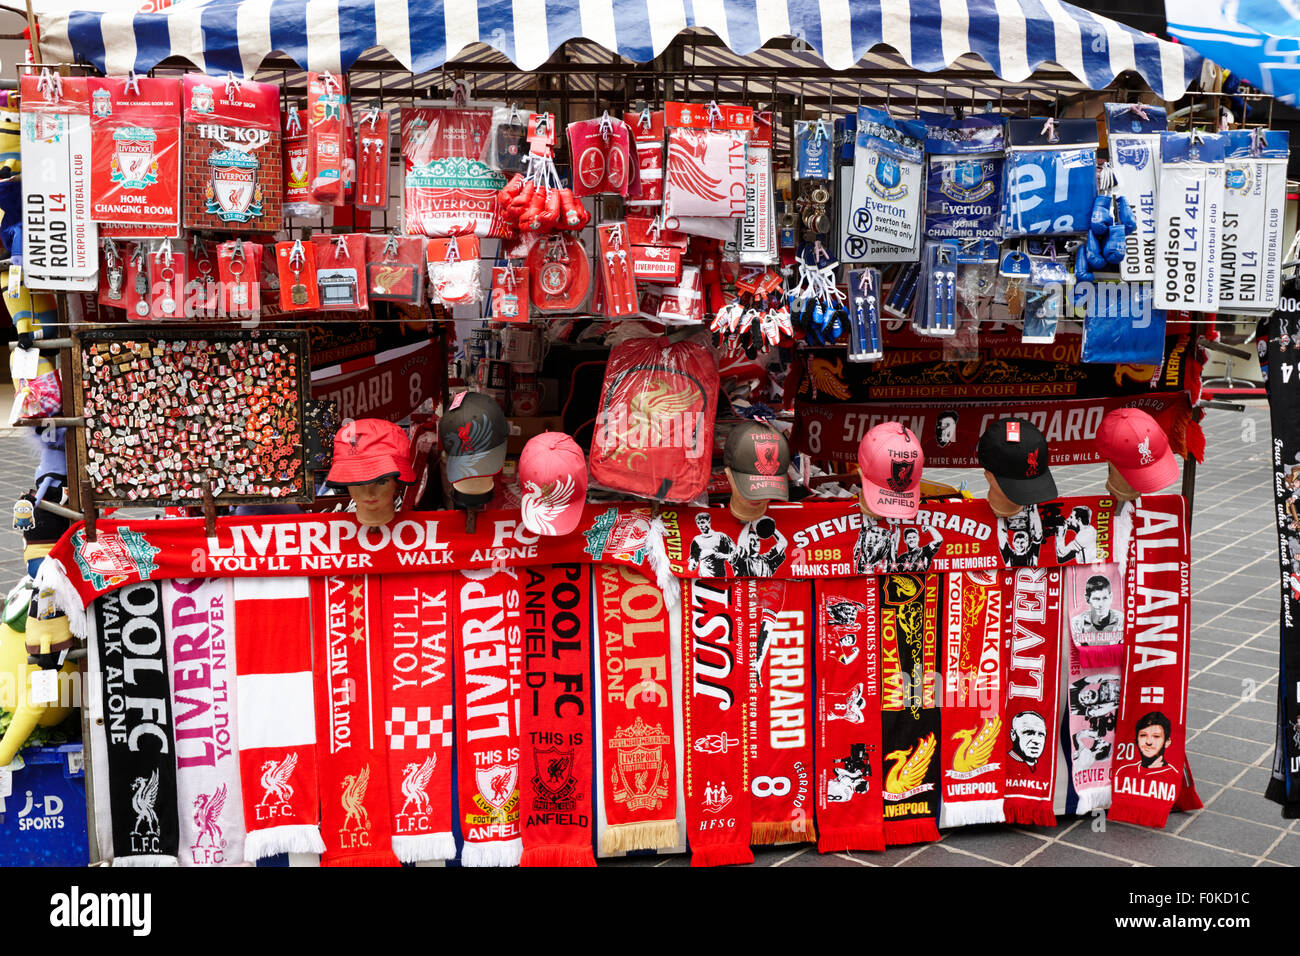 Liverpool and everton football club scarves for sale England UK Stock Photo